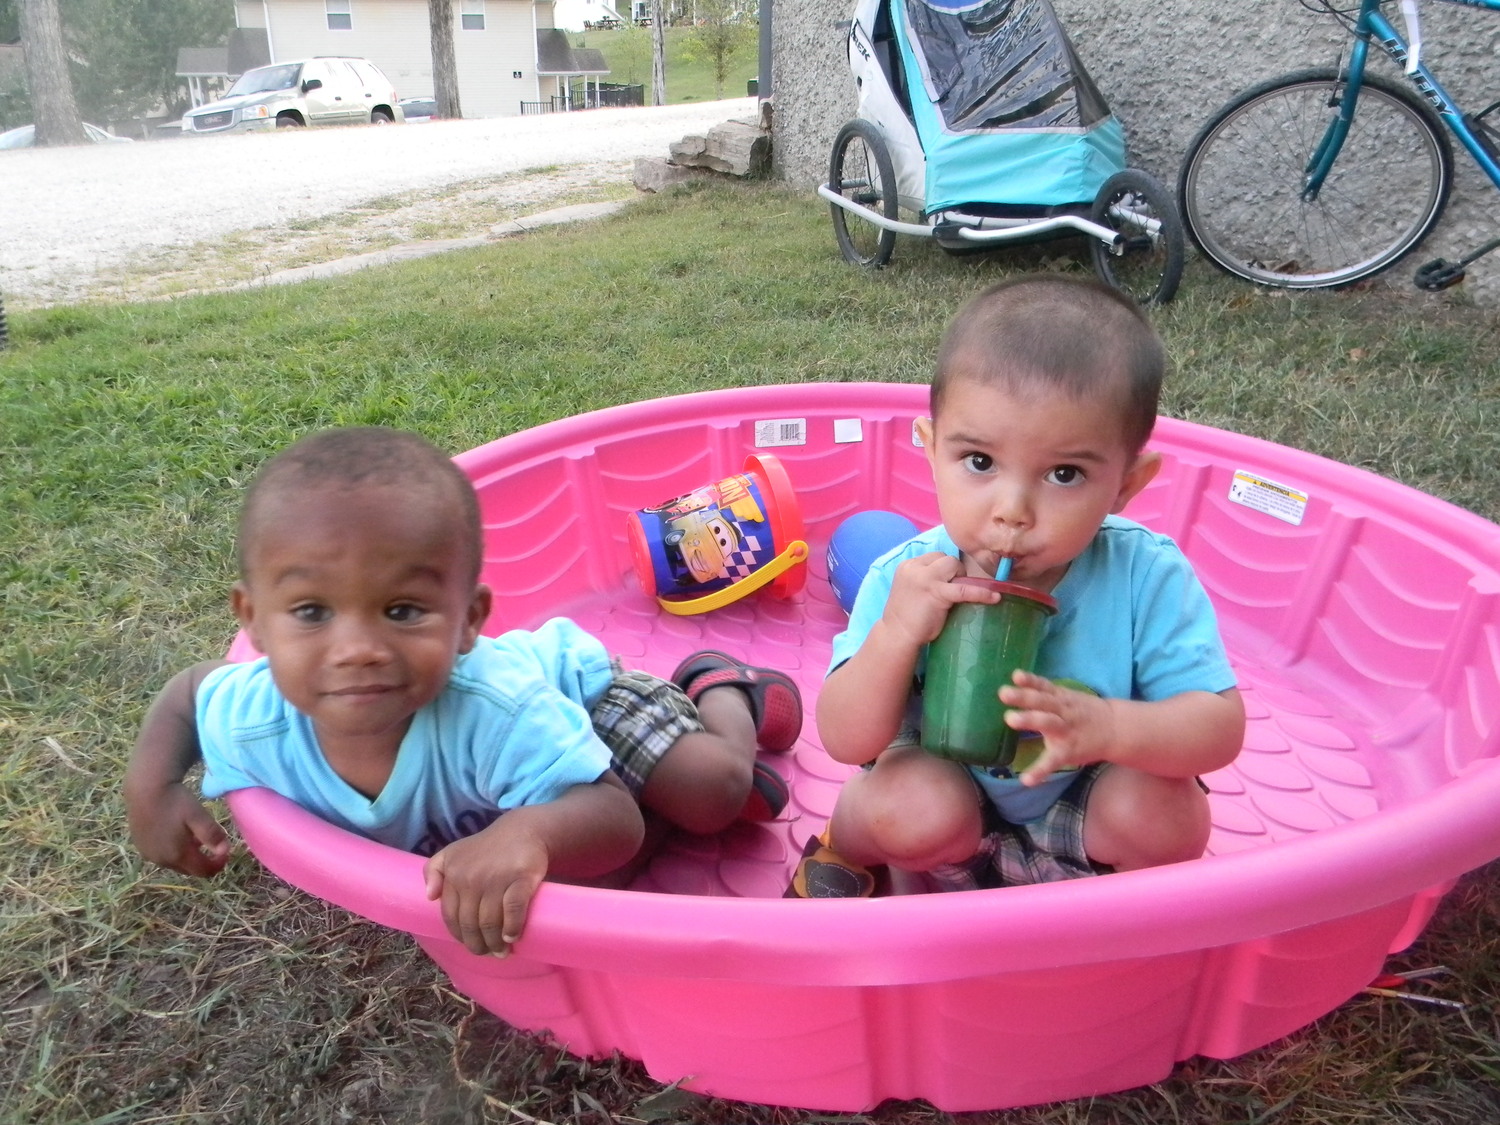 Judah and Israel modeling some face-to-face interaction as the chill in the pool :)